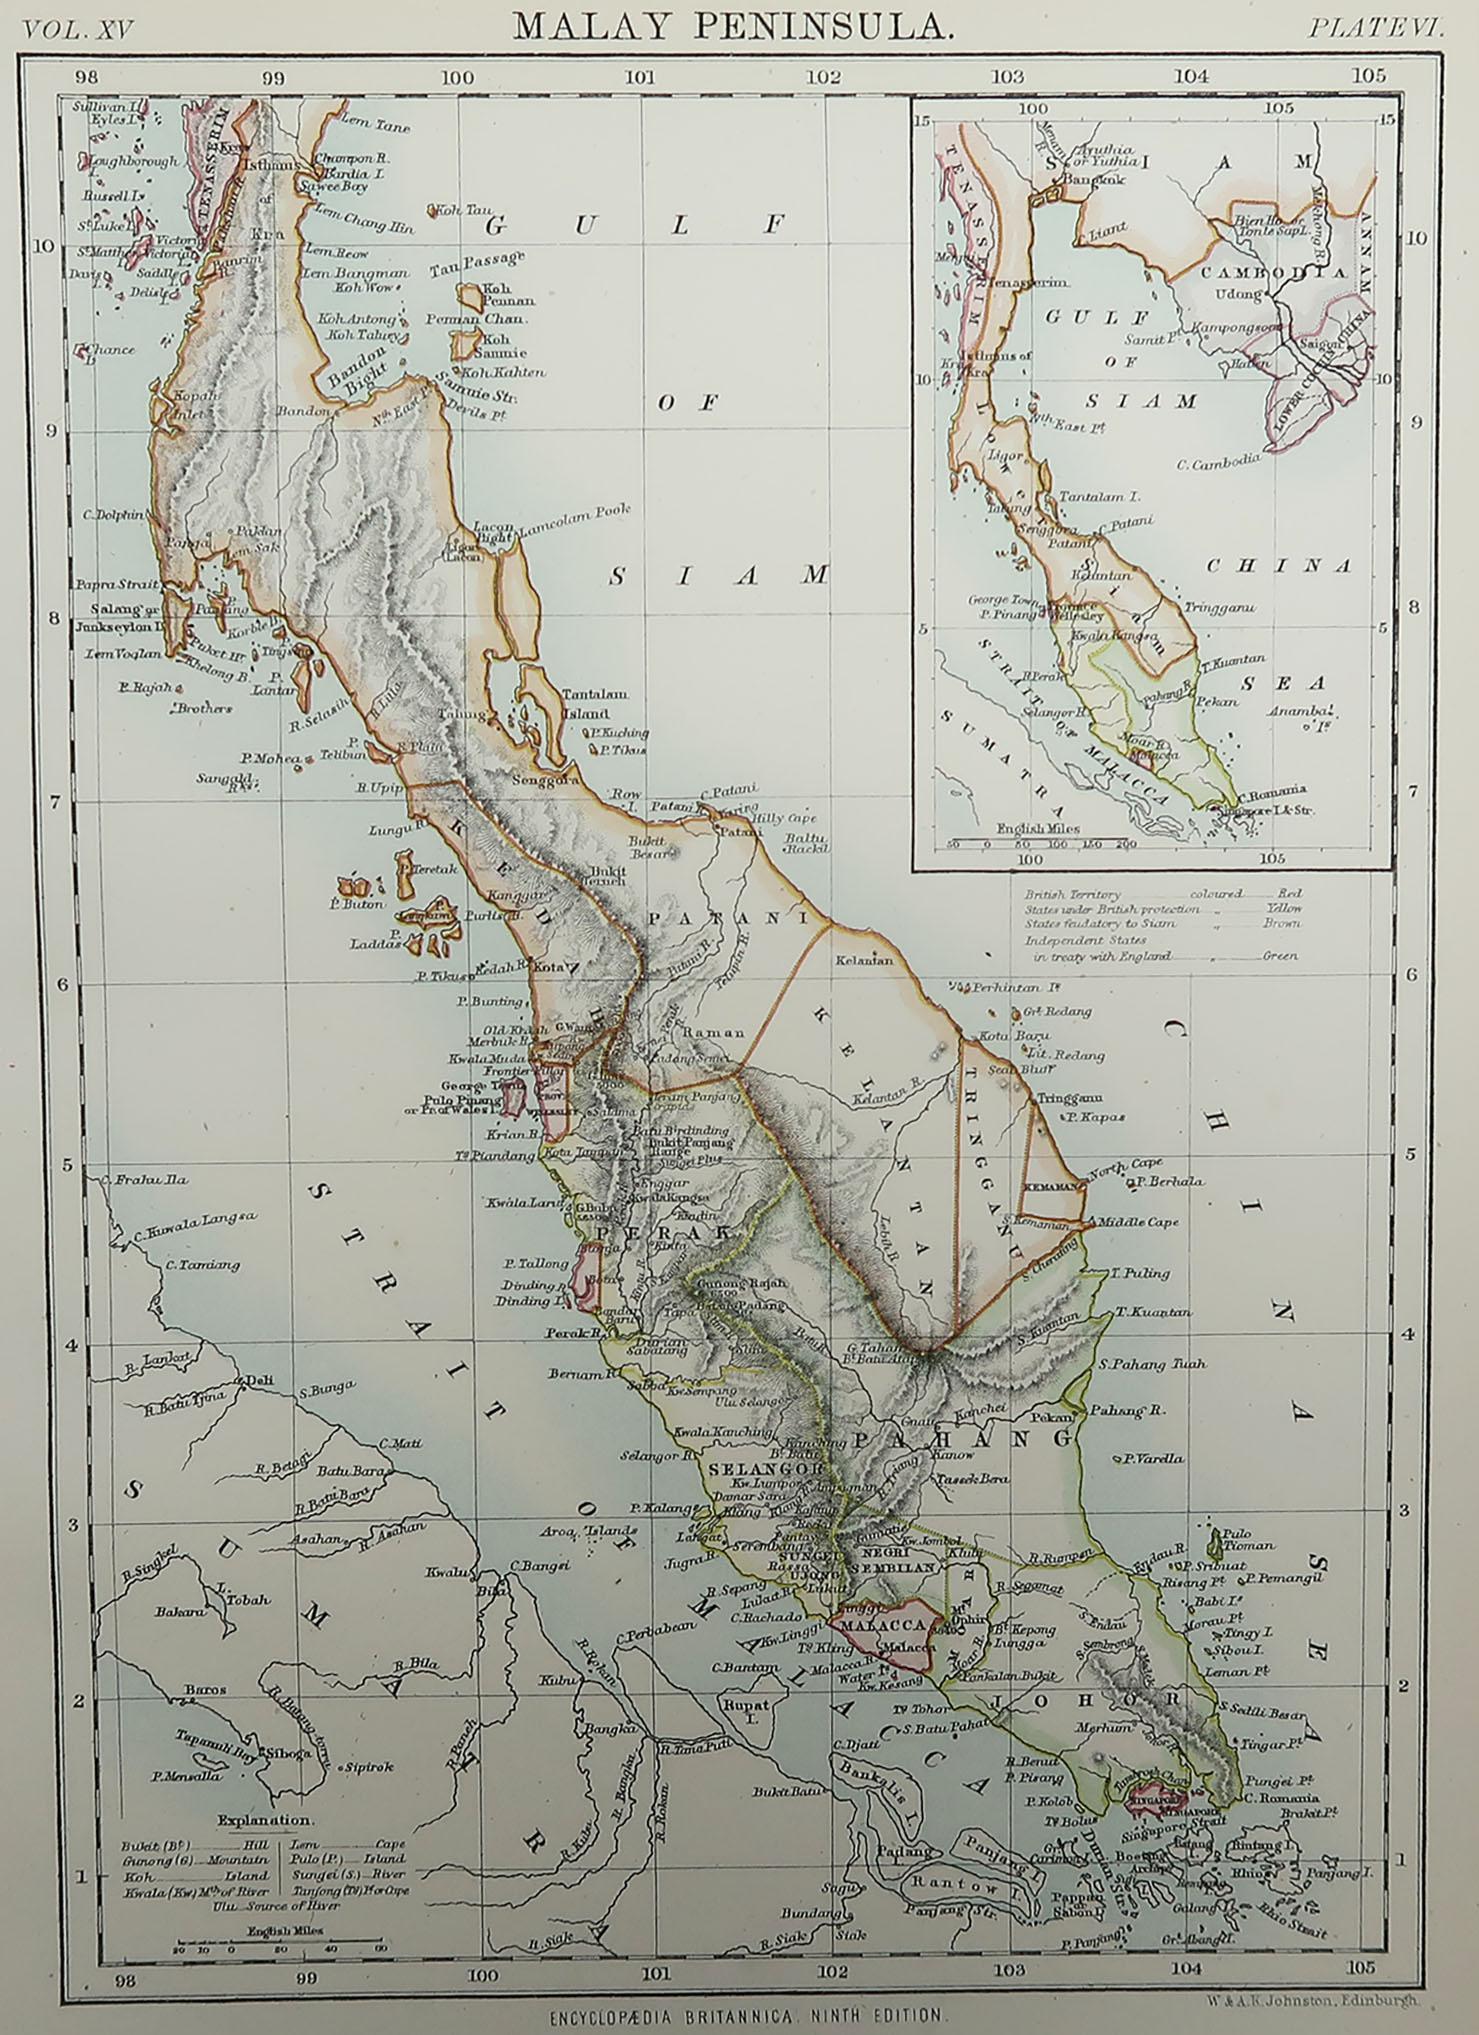 Great map of The Malay Peninsula

Drawn and Engraved by W. & A.K. Johnston

Published By A & C Black, Edinburgh.

Original colour

Unframed.








 